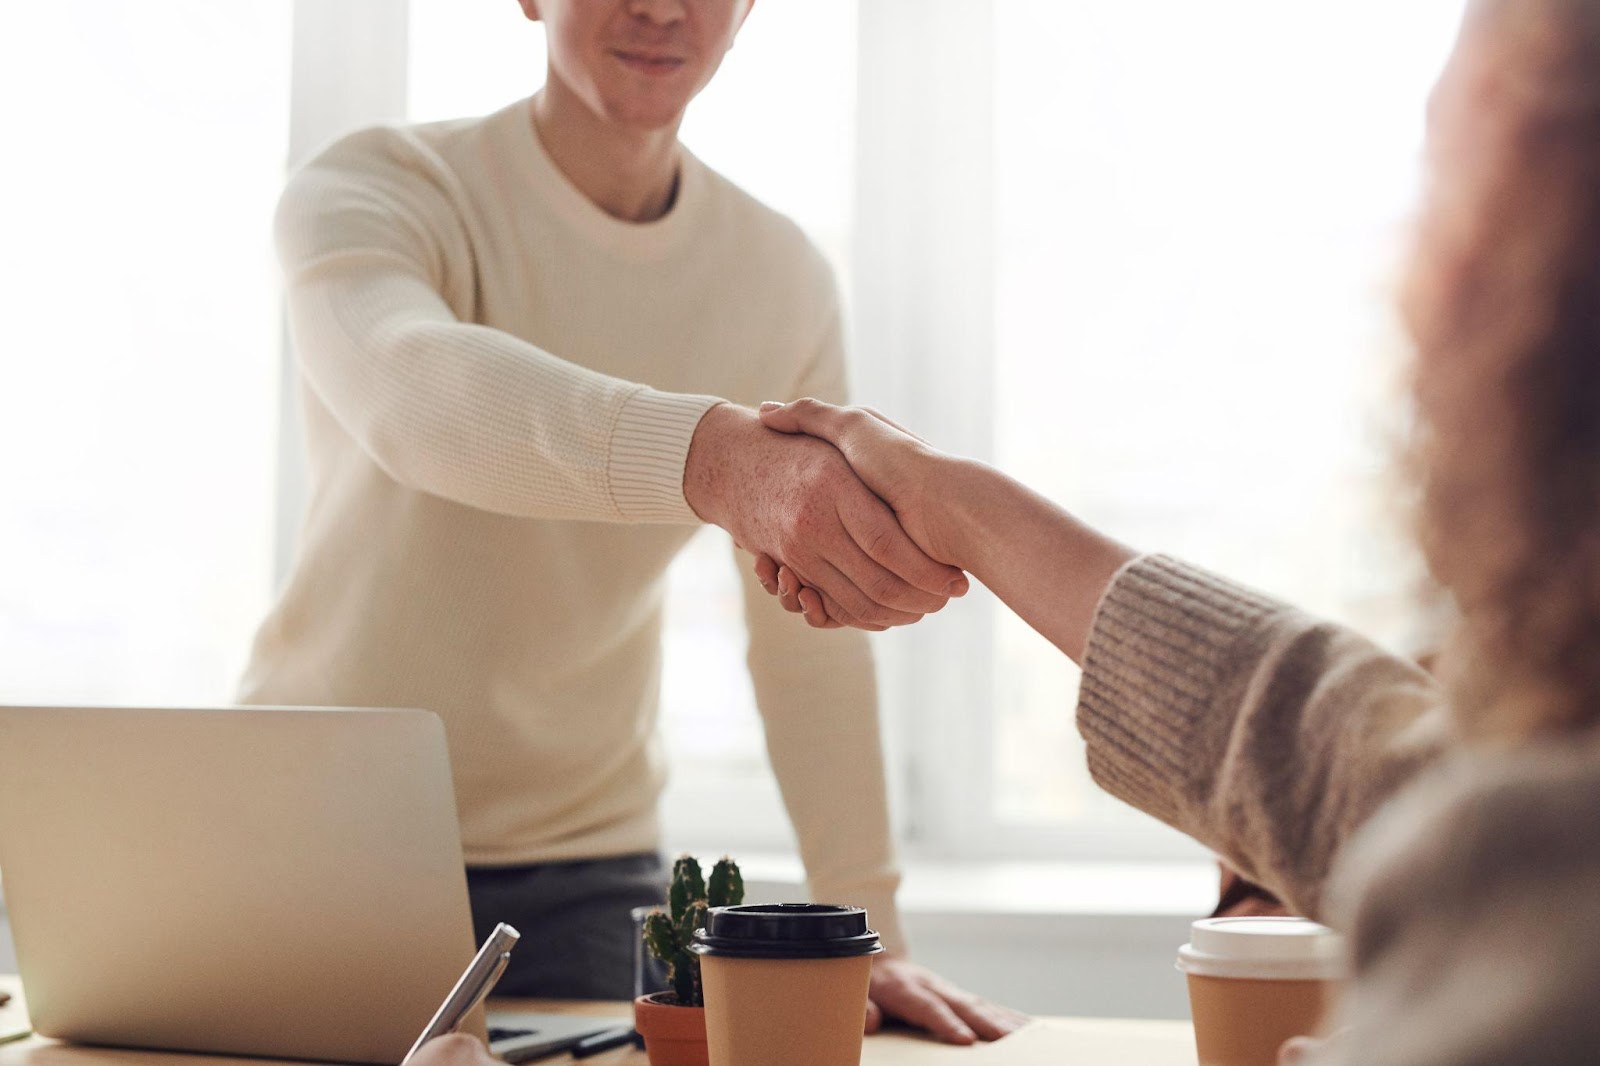  two people shaking hands after an interview